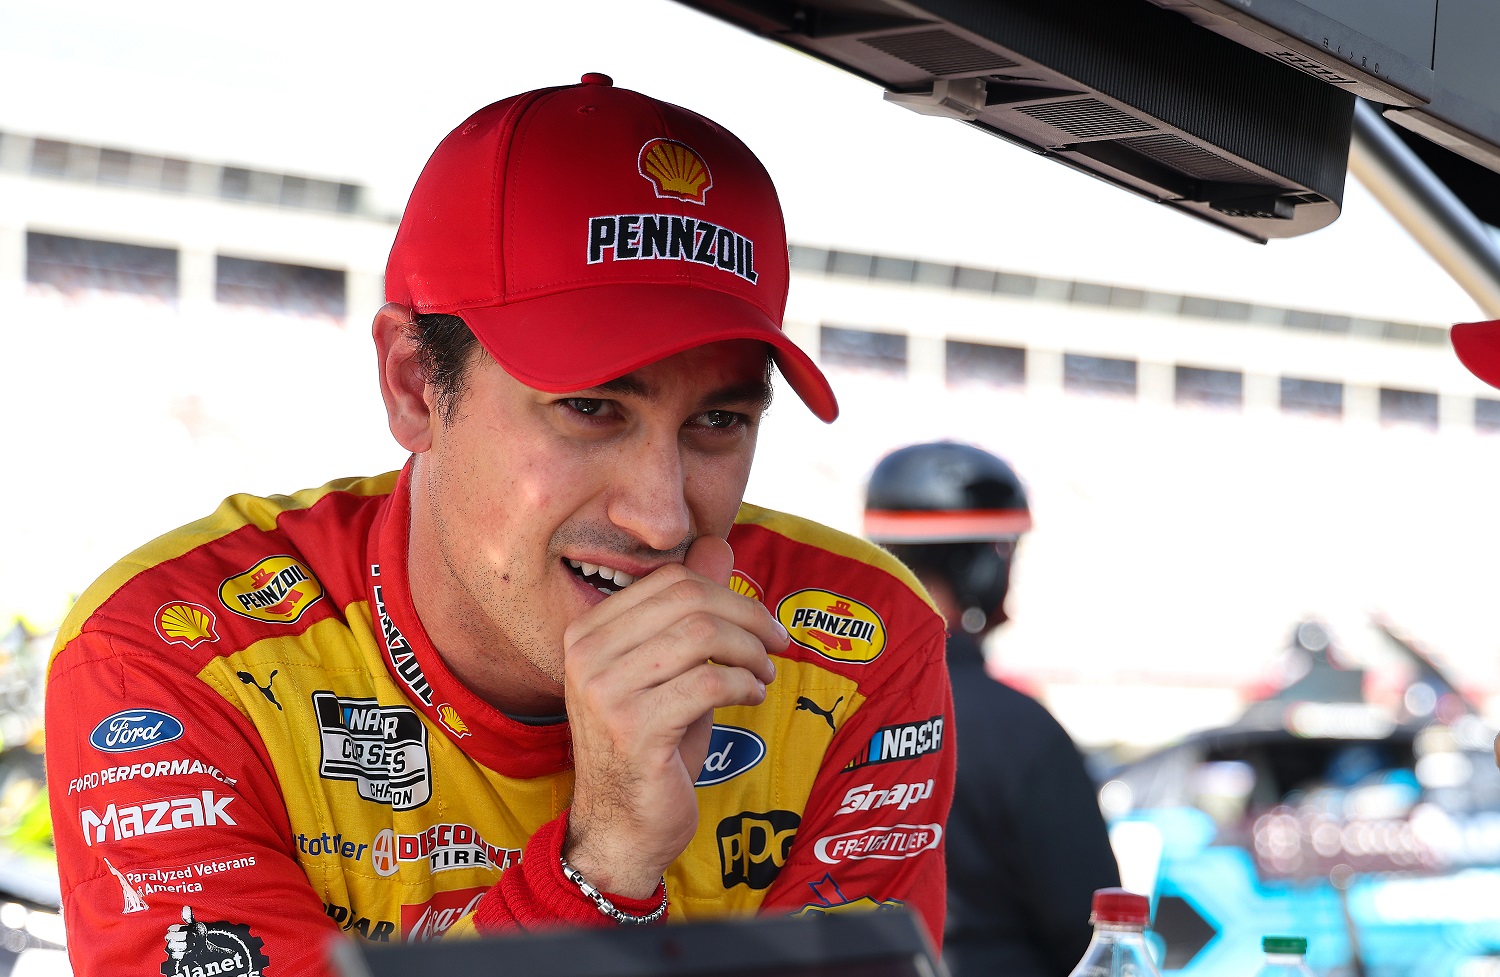 Joey Logano waits on the grid during practice for NASCAR Cup Series Bank of America Roval 400  at Charlotte Motor Speedway on Oct. 8, 2022 in Concord, North Carolina. | Mike Mulholland/Getty Images